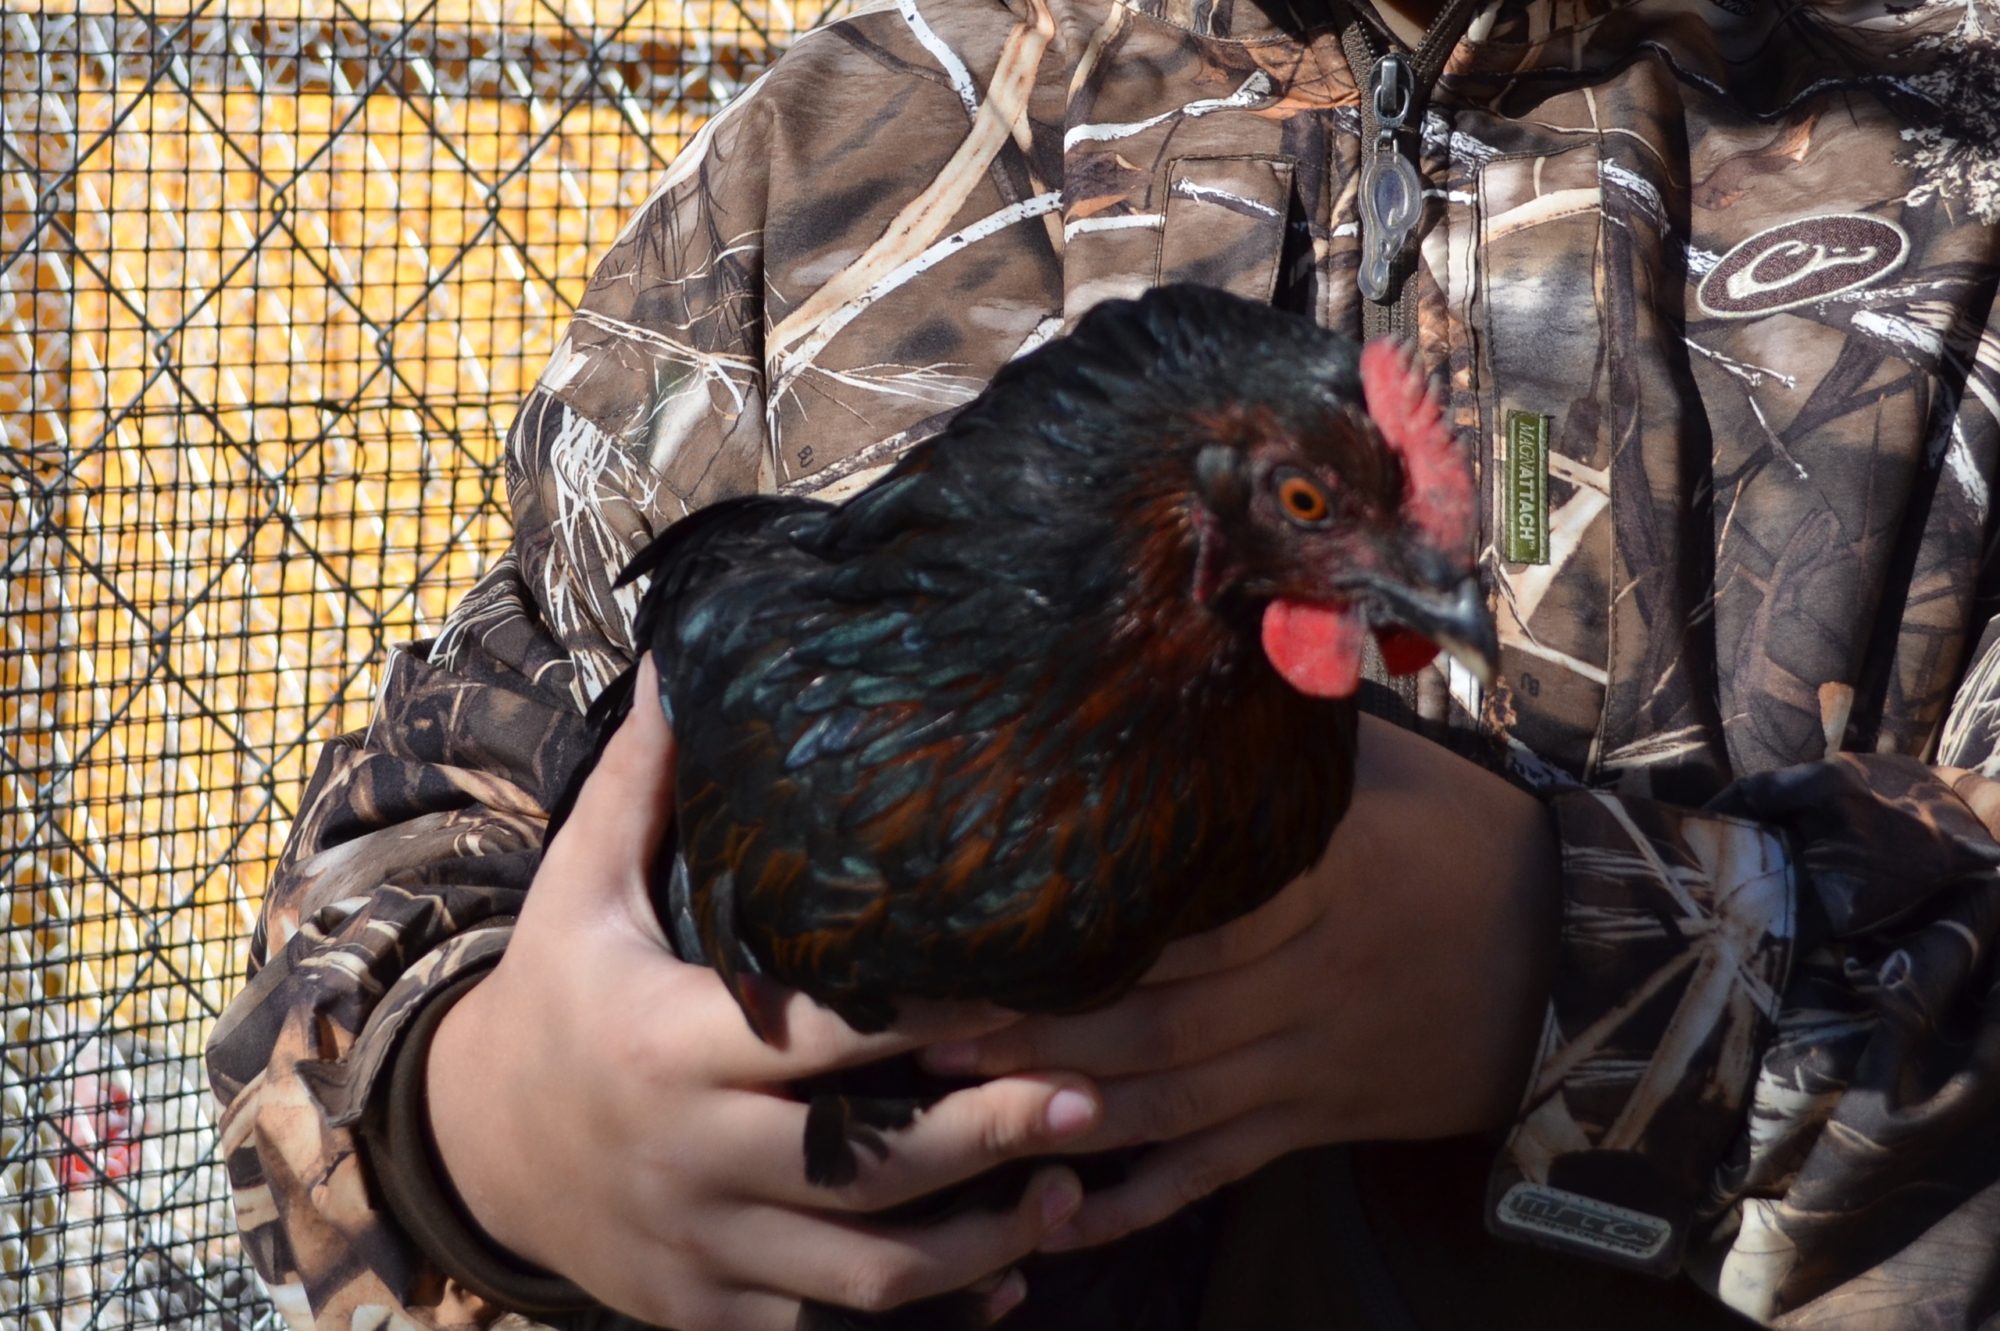 one of my sons 24 4-H chickens